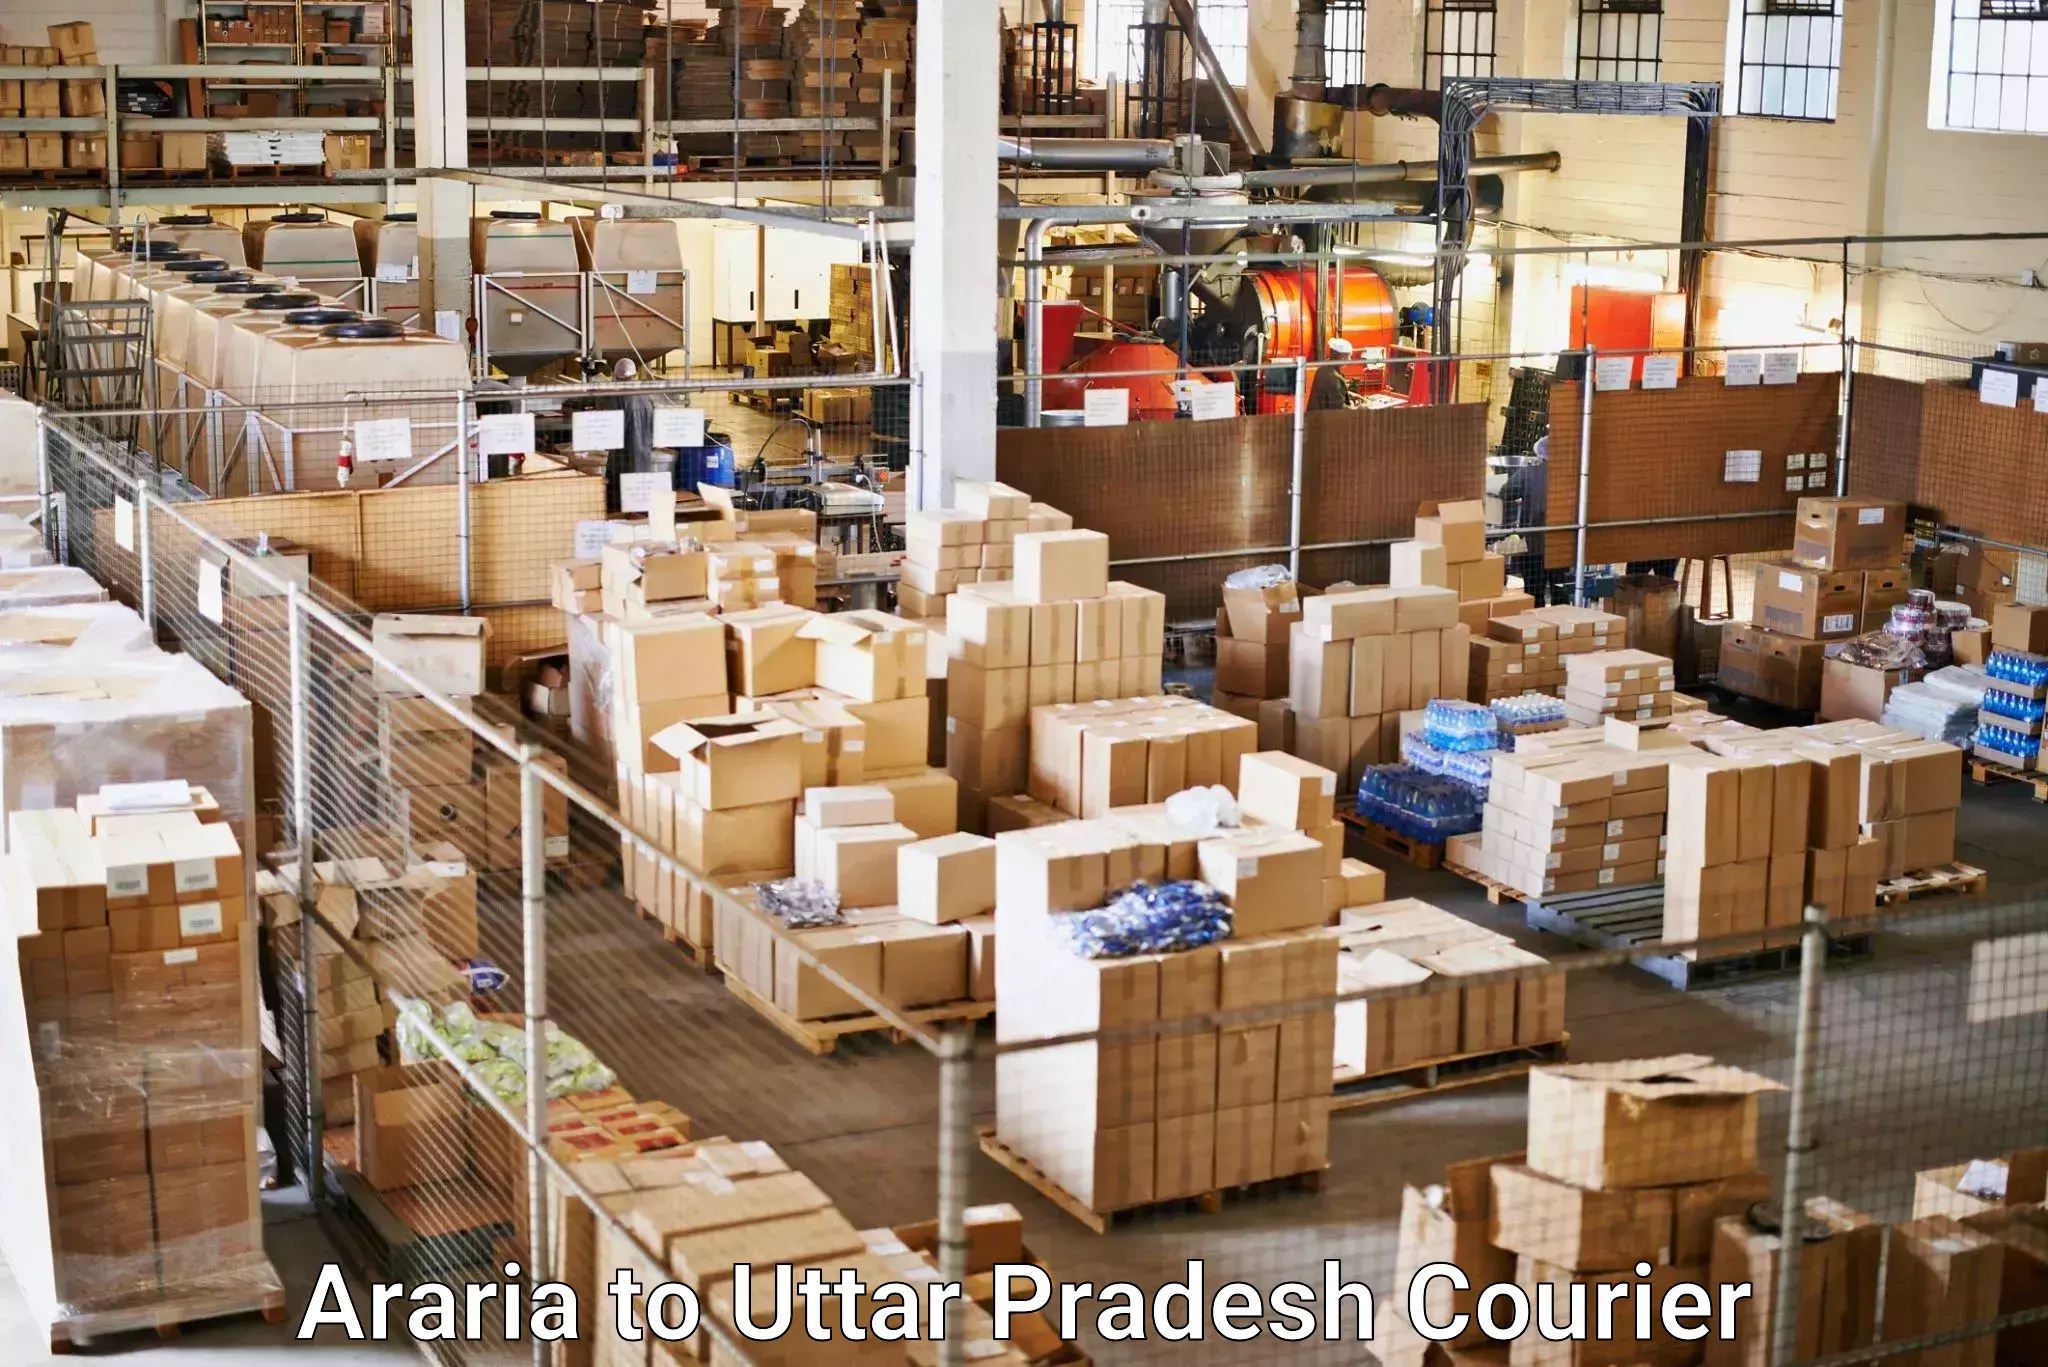 Subscription-based courier Araria to Vrindavan